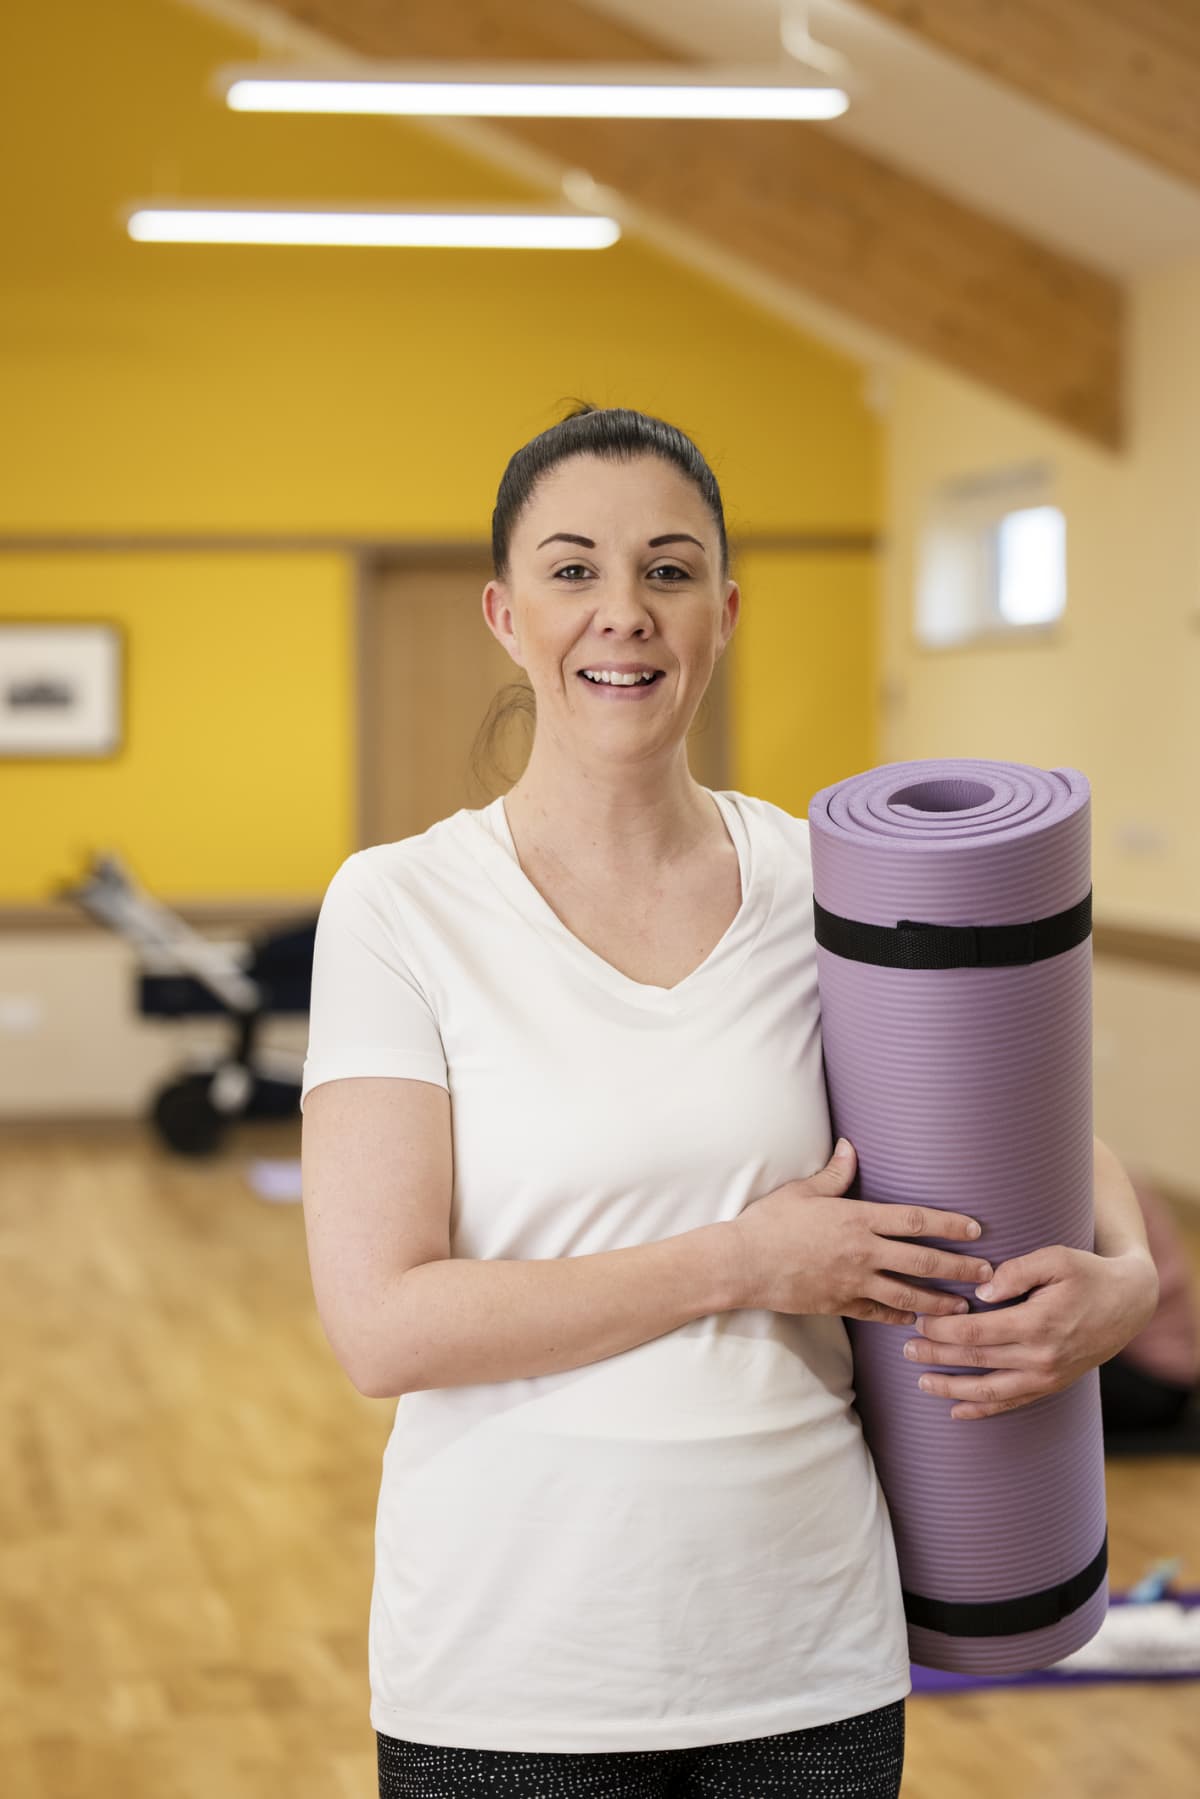 A front-view waist-up portrait shot of a woman in a yoga class, she is standing, smiling, and looking at the camera while holding an exercise mat.